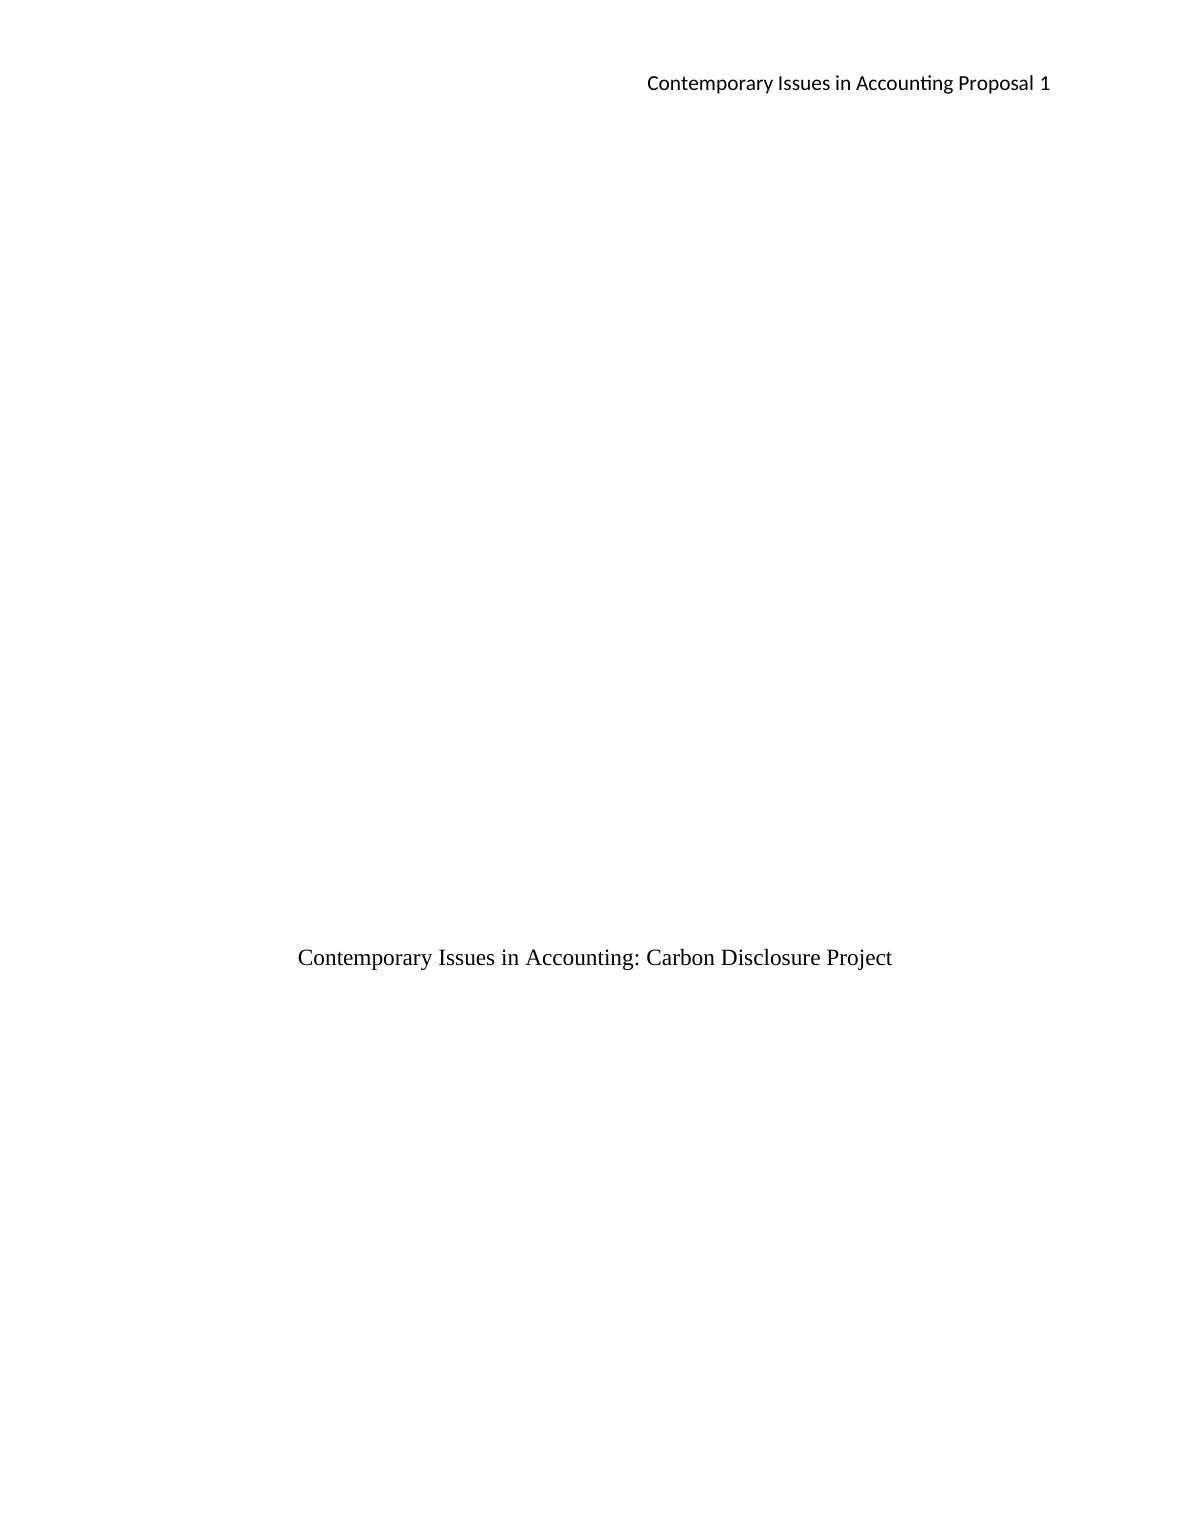 Contemporary Issues in Accounting: Carbon Disclosure Project Contents_1